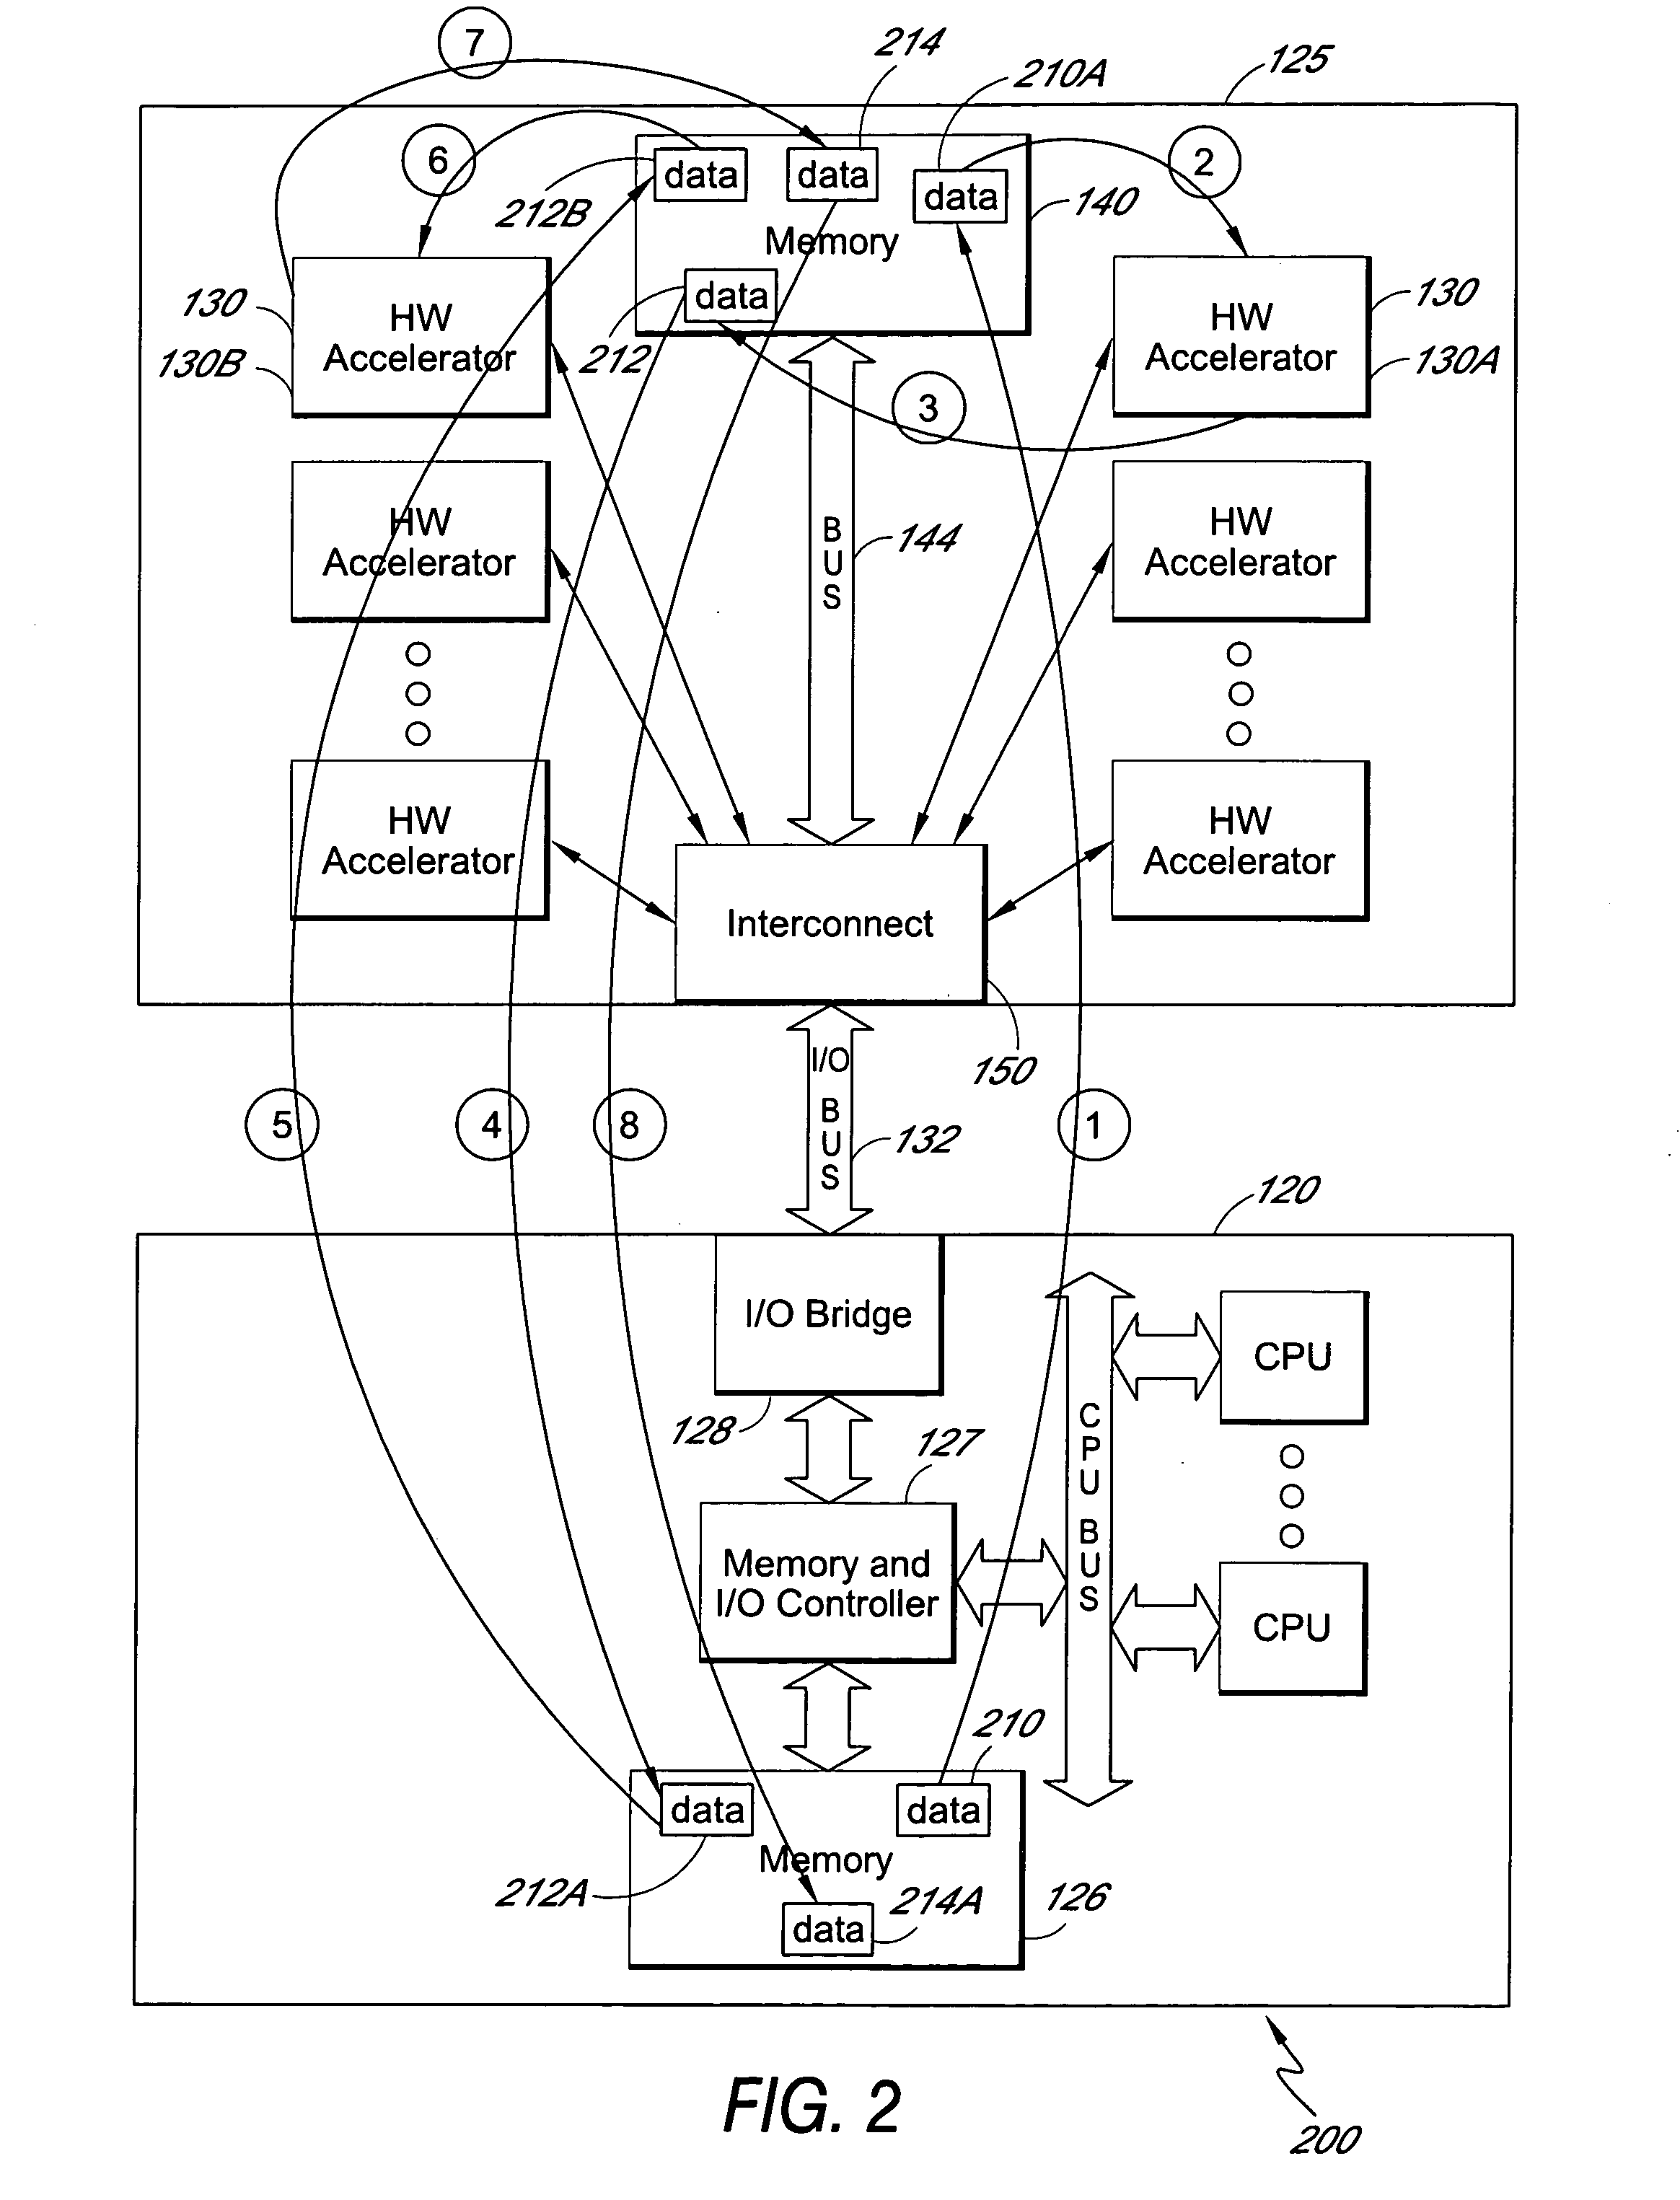 Method and apparatus for chaining multiple independent hardware acceleration operations